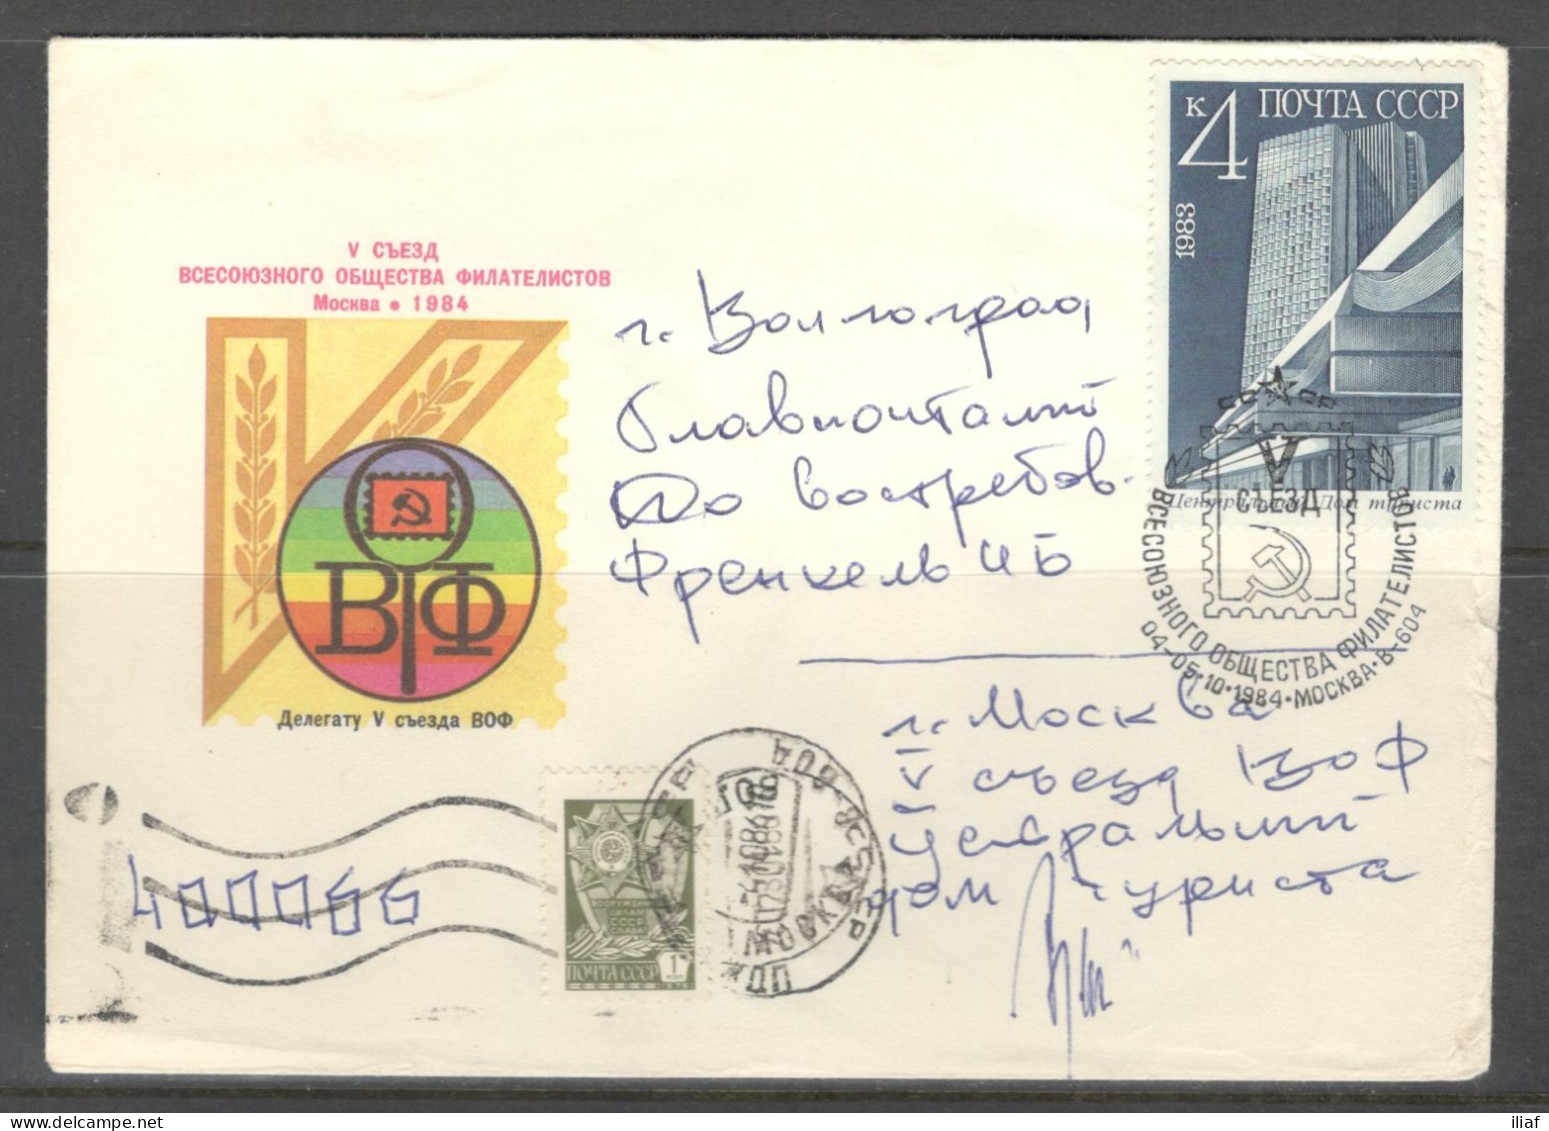 RUSSIA & USSR. 5th Congress Of The All-Union Society Of Philatelists. Special Envelope For Participants. - Stamp's Day